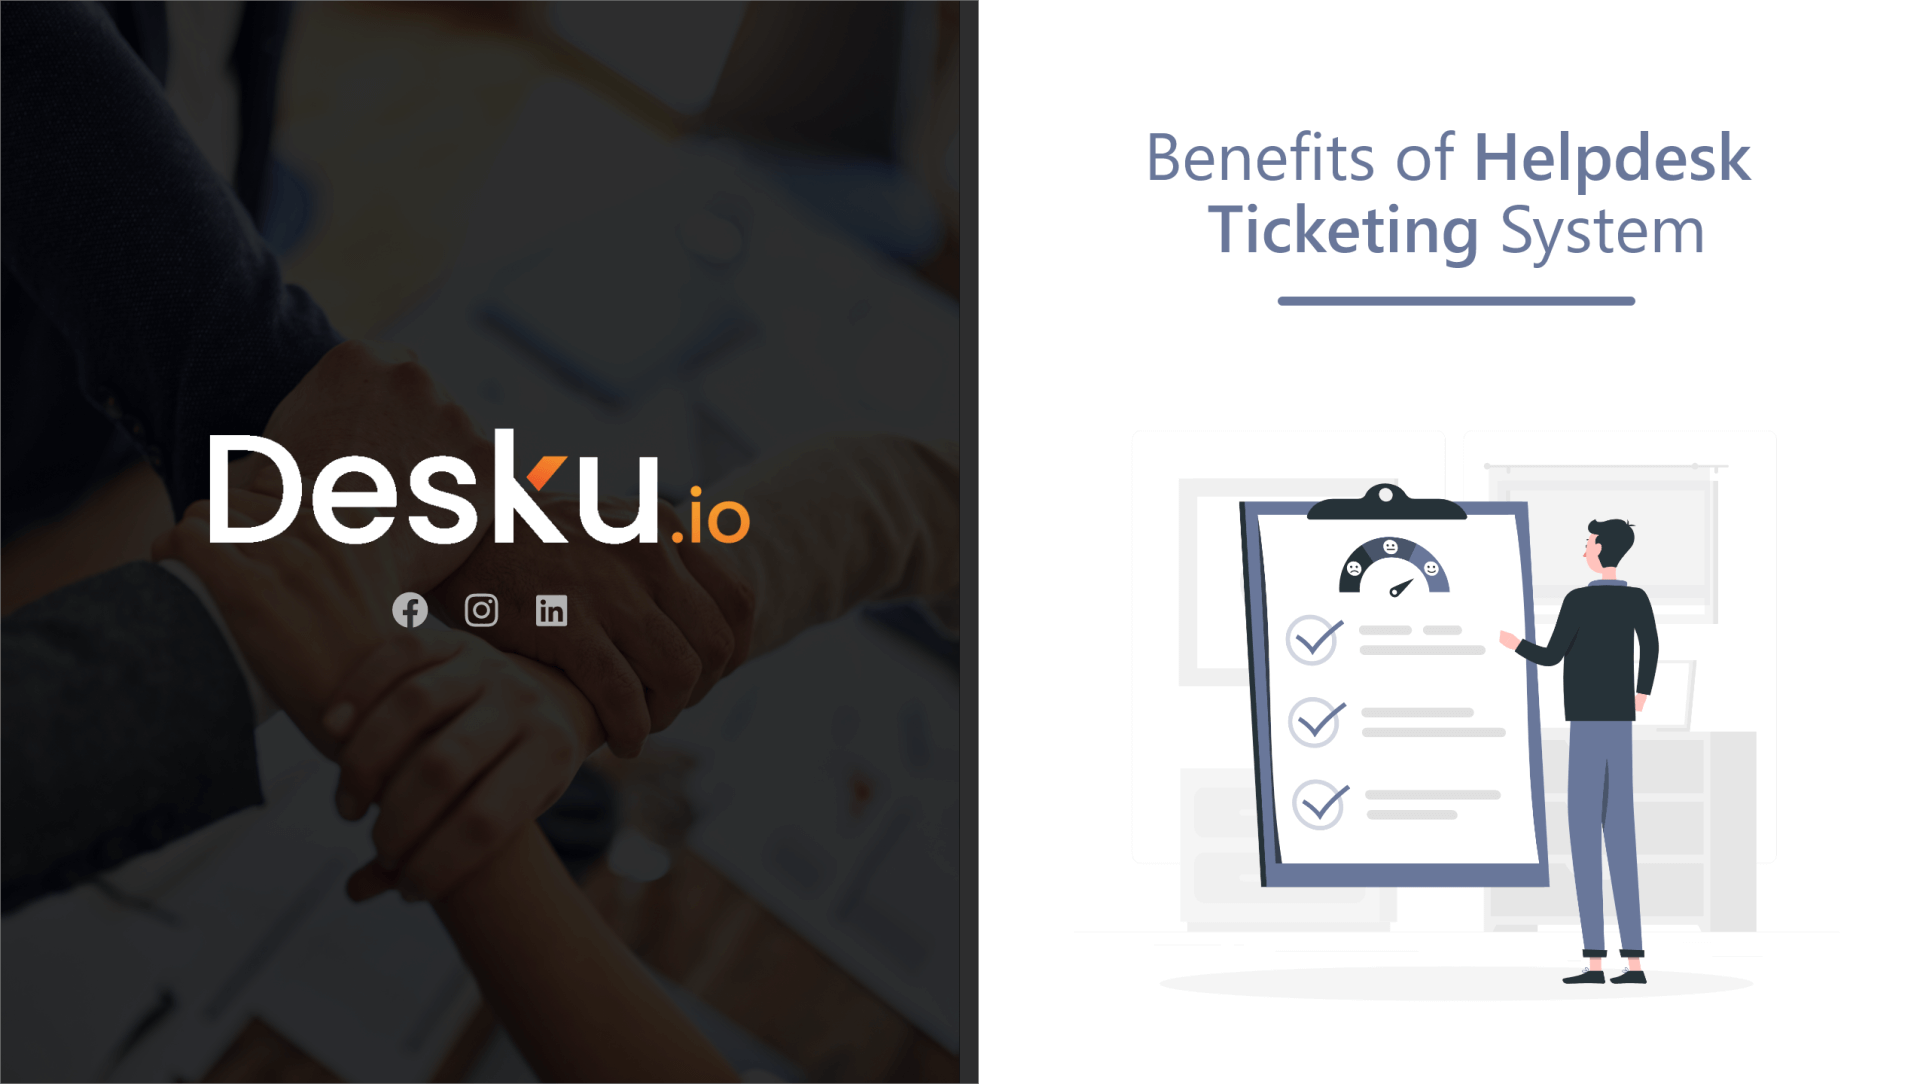 Benefits of the Helpdesk Ticketing System